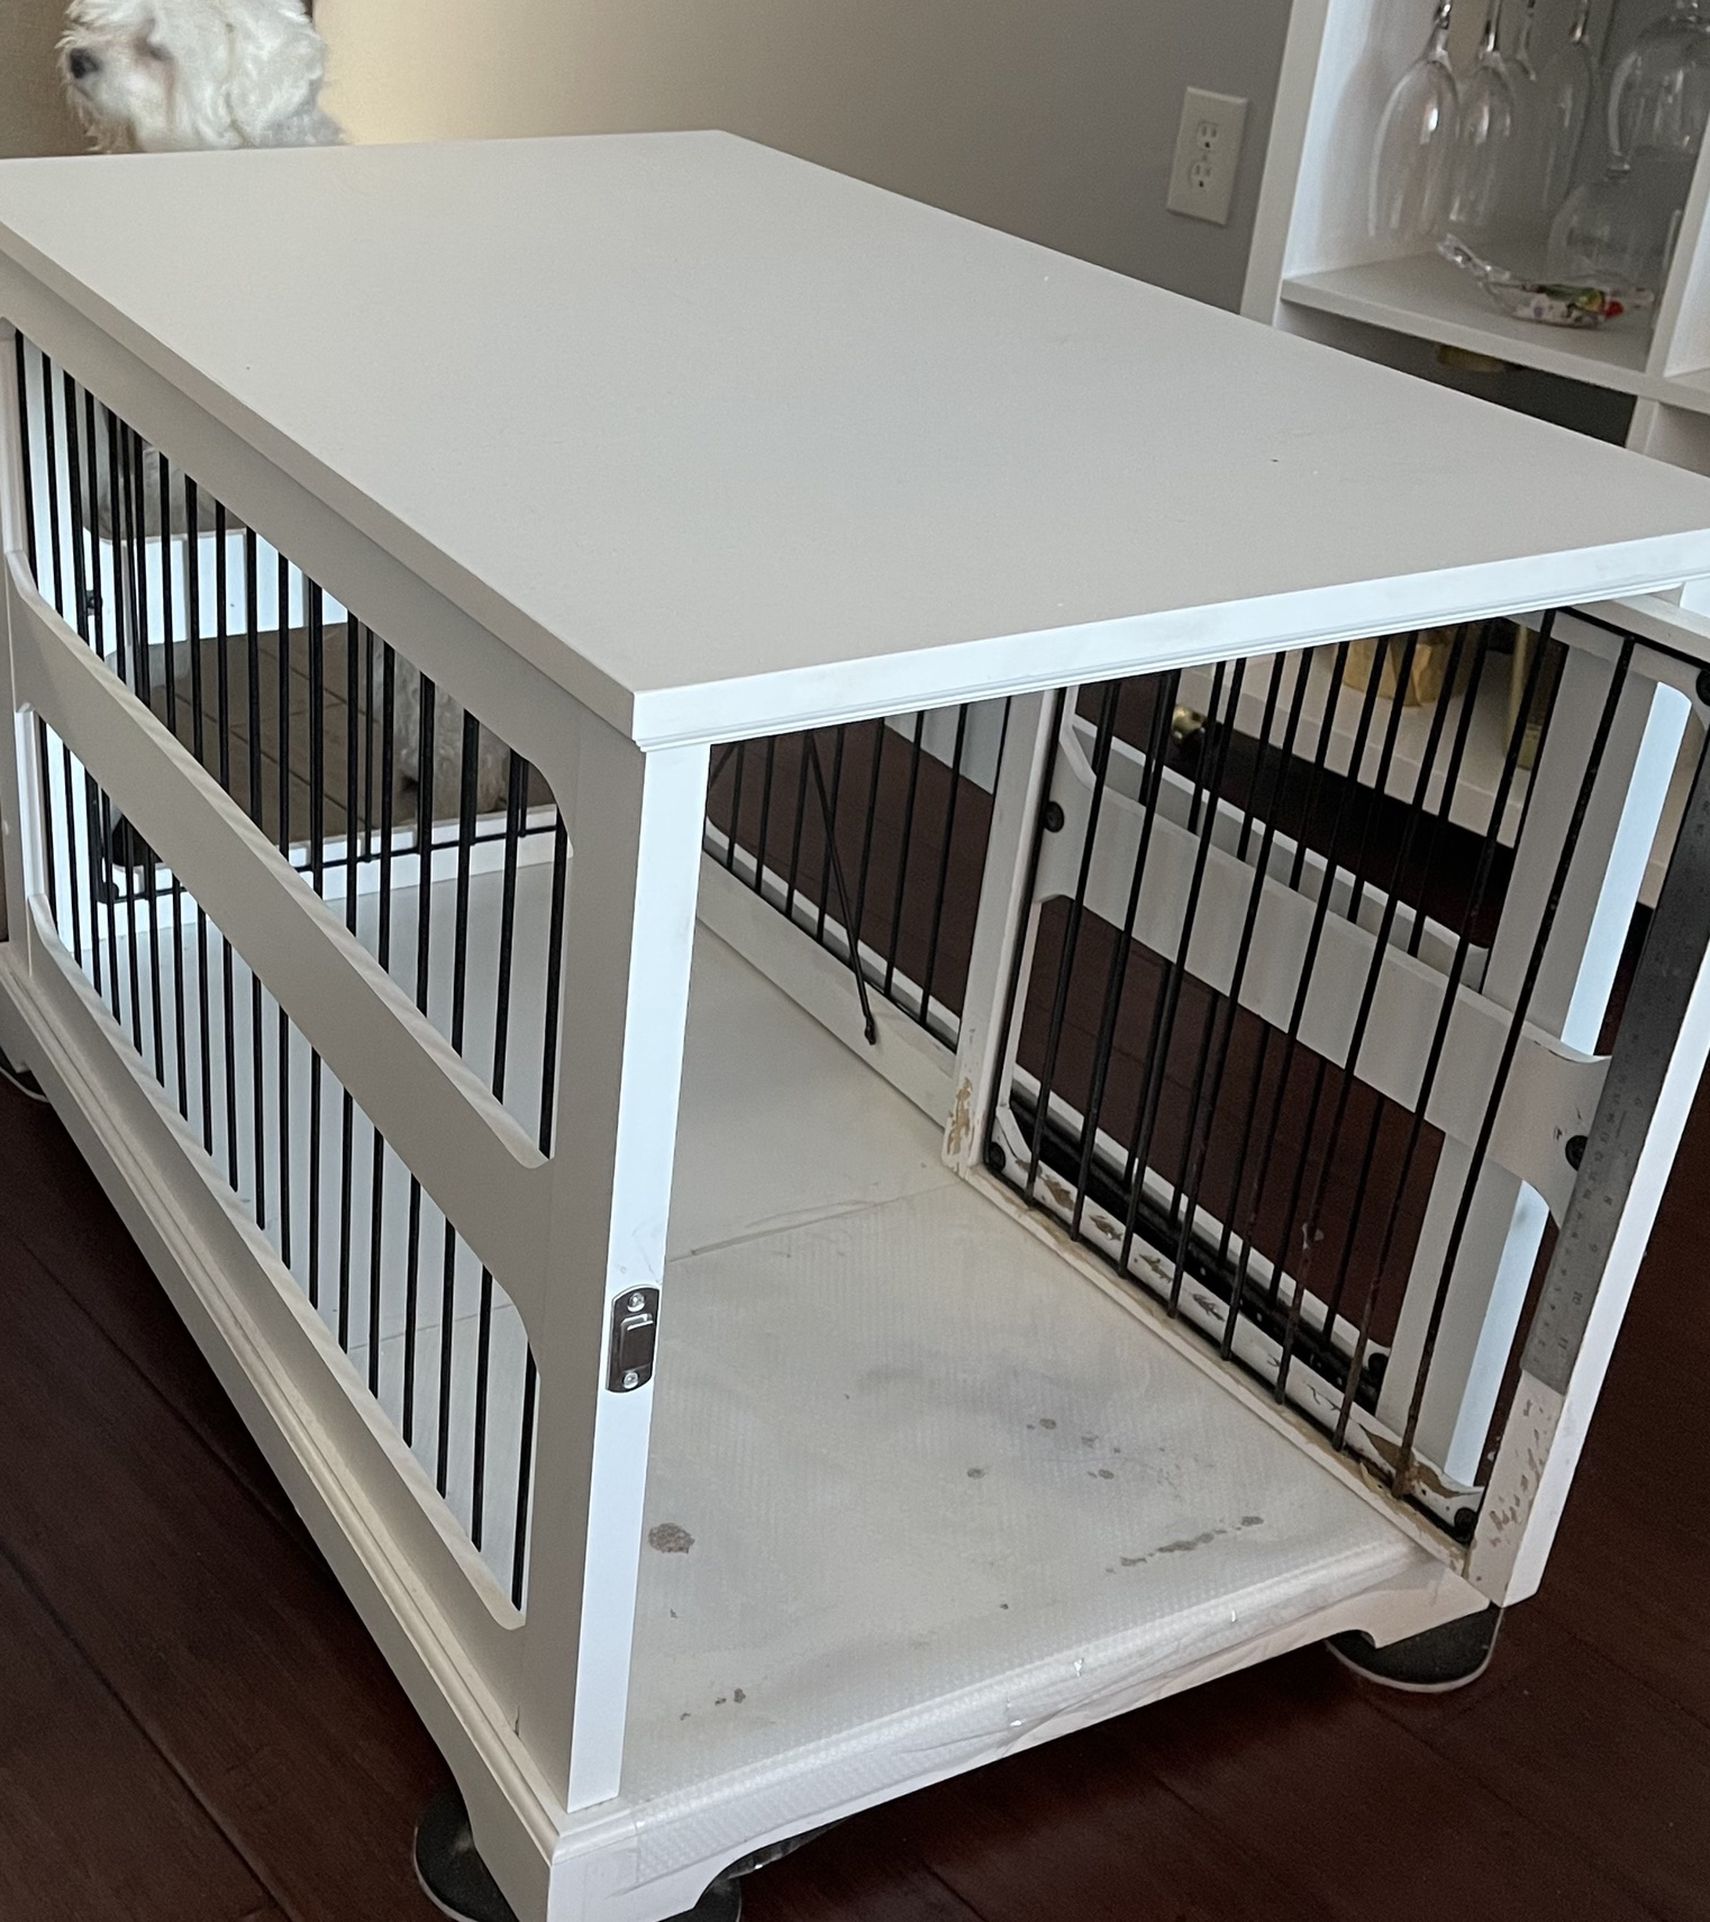 Dog Crate and Side Table In One